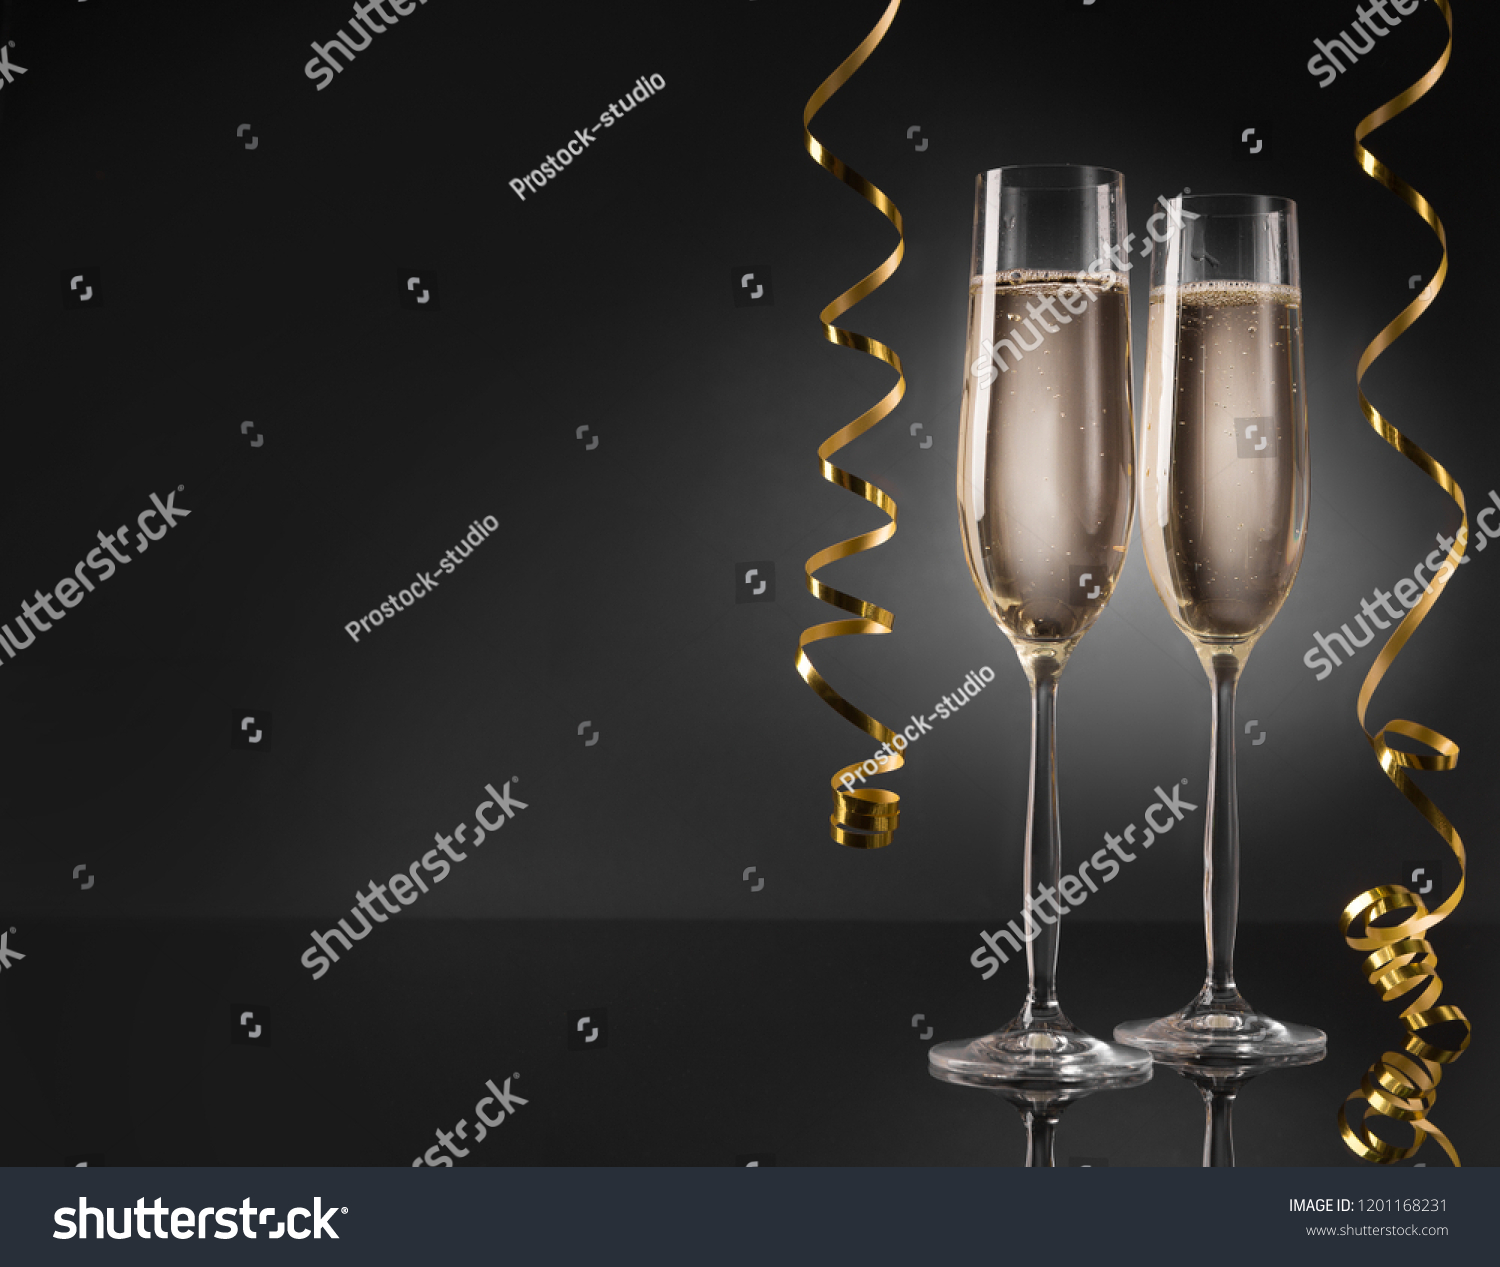 Two champagne glasses ready to bring in the New Year #1201168231